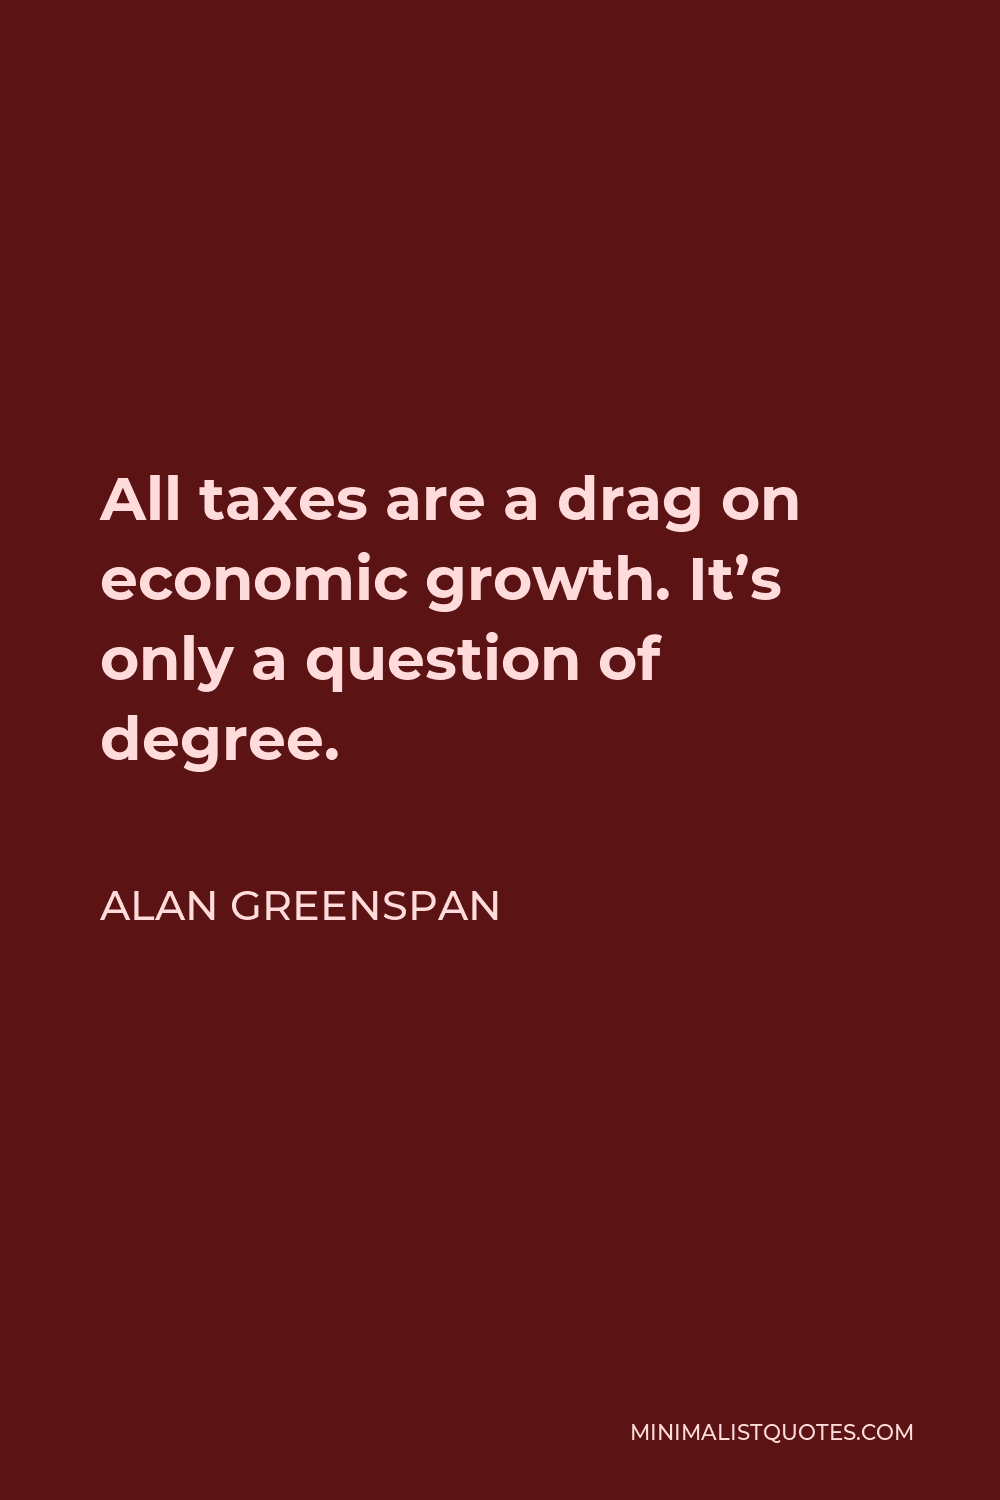 Alan Greenspan Quote - All taxes are a drag on economic growth. It’s only a question of degree.